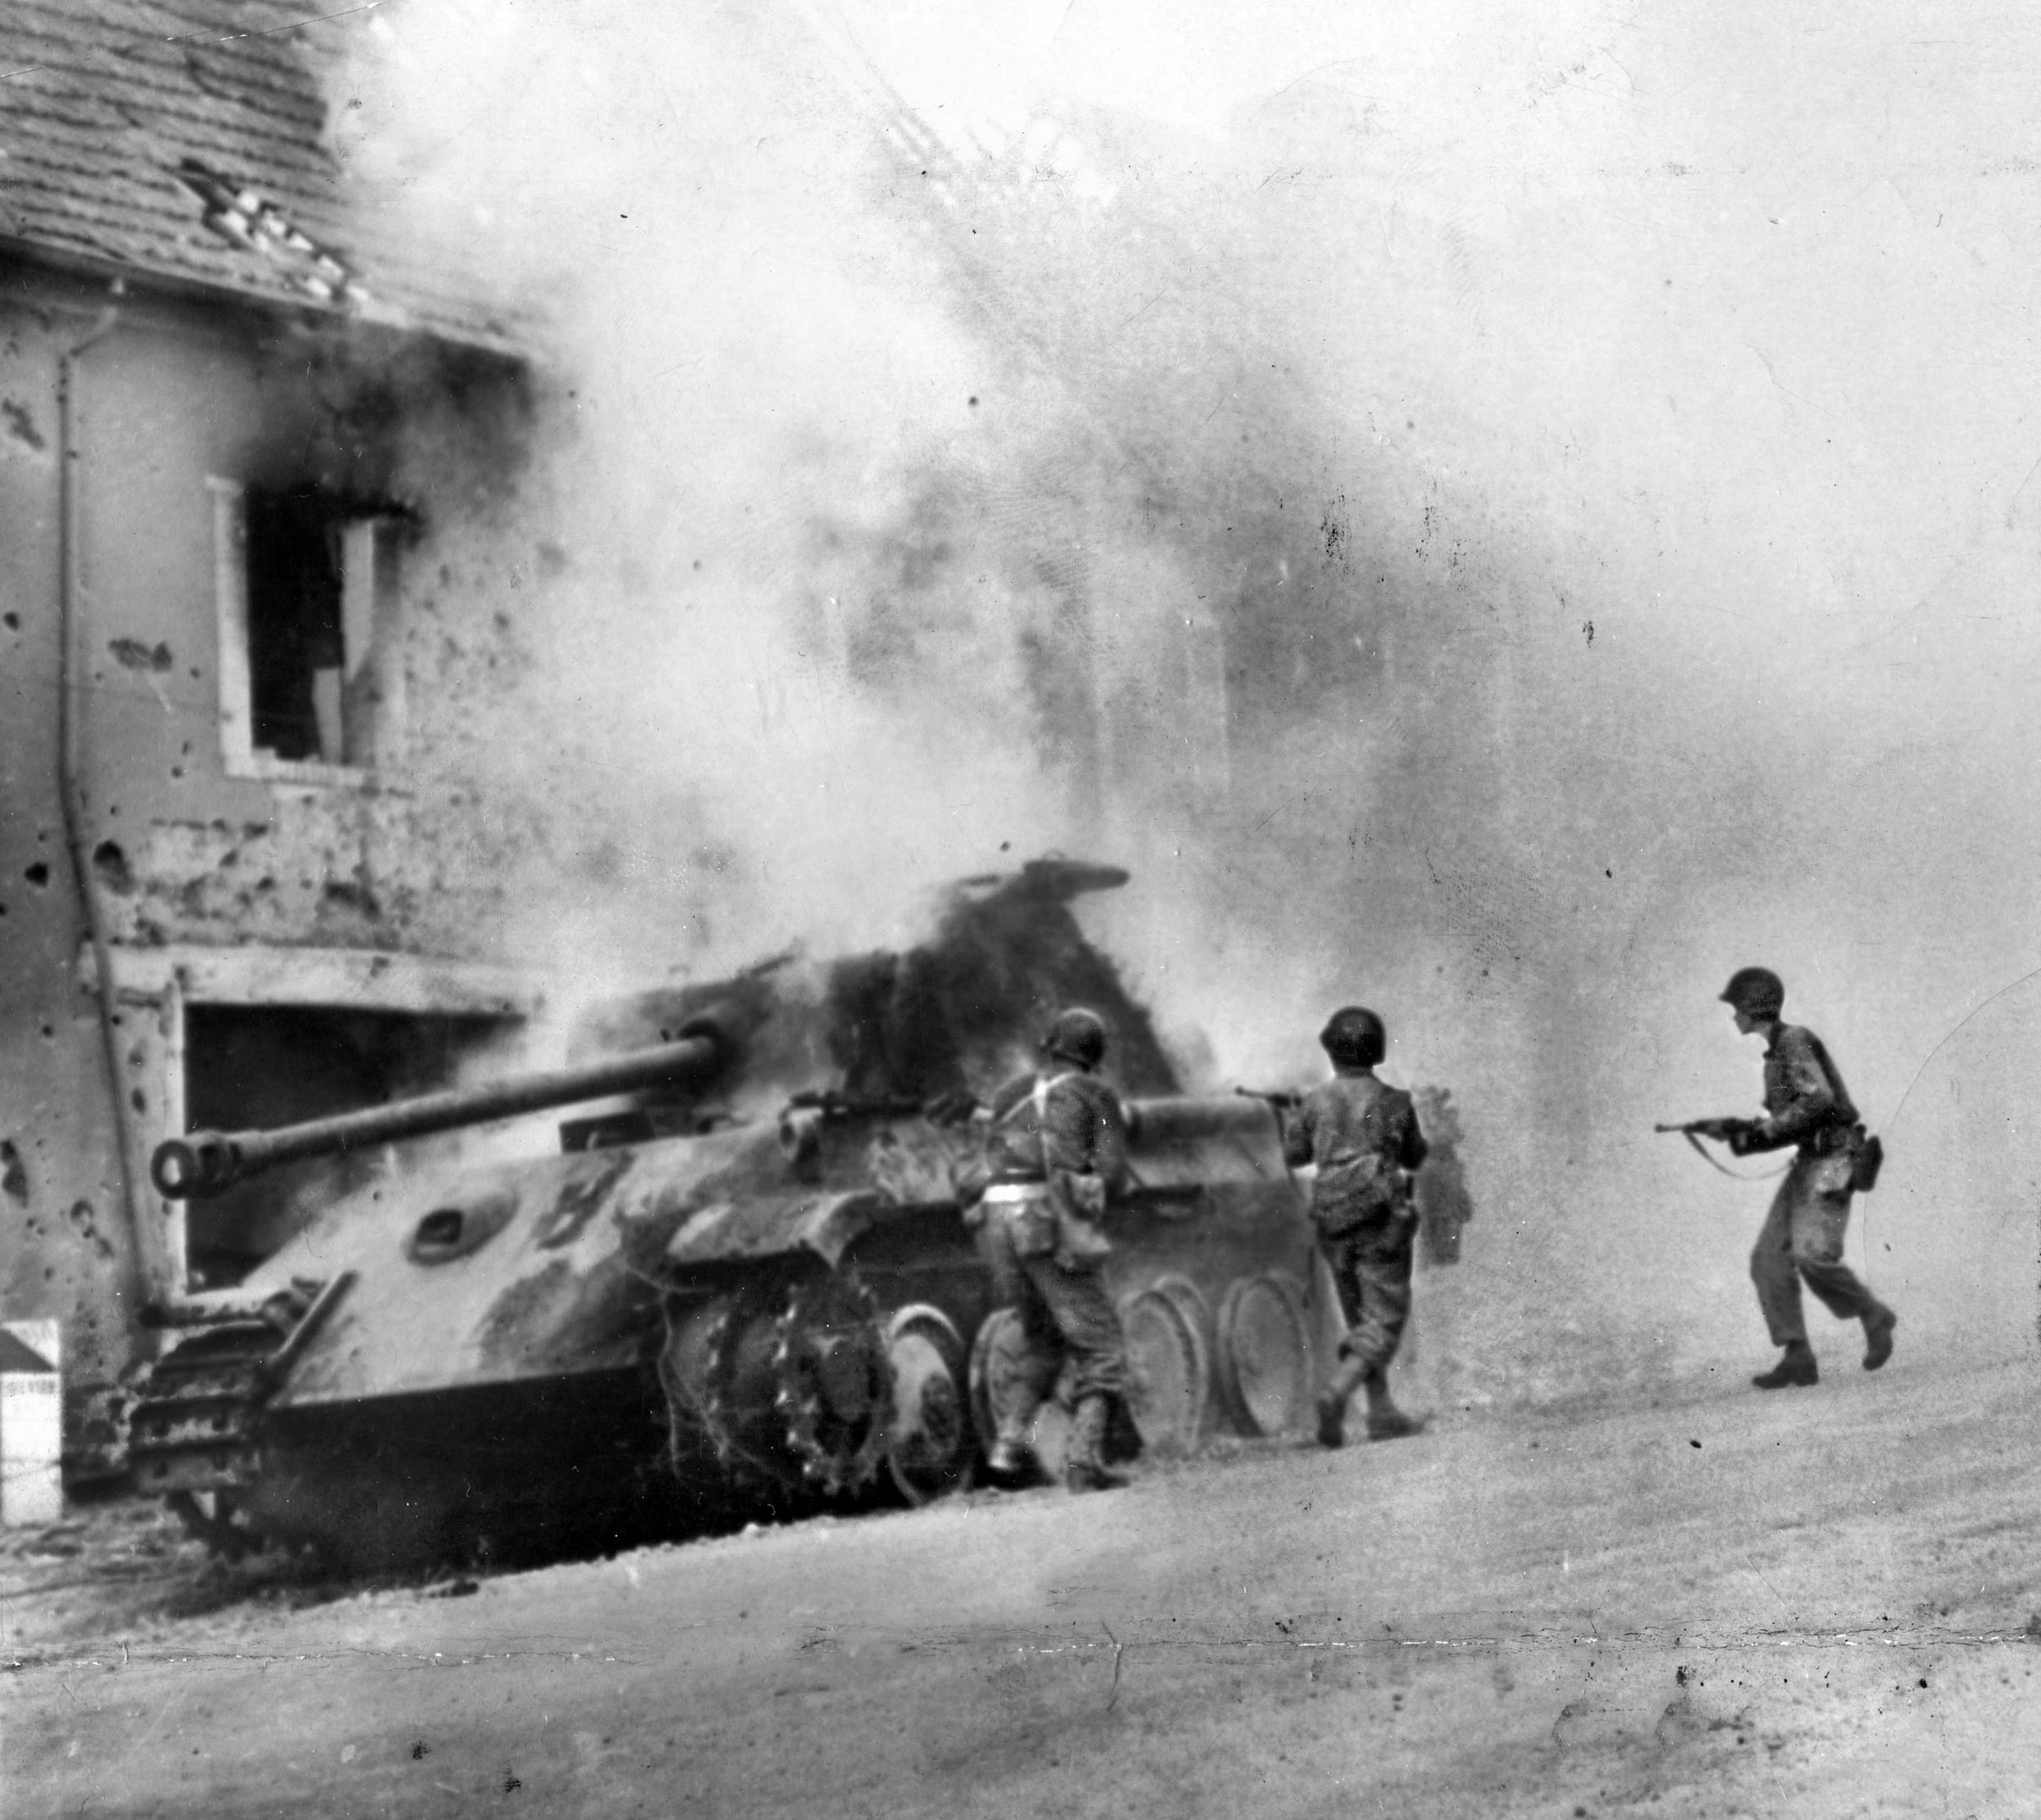 American infantrymen cautiously approach a burning German Tiger I that they have just knocked out of action in the fighting around Mortain. After the battle, the surviving German forces retreated towards Falaise where many would meet destruction.